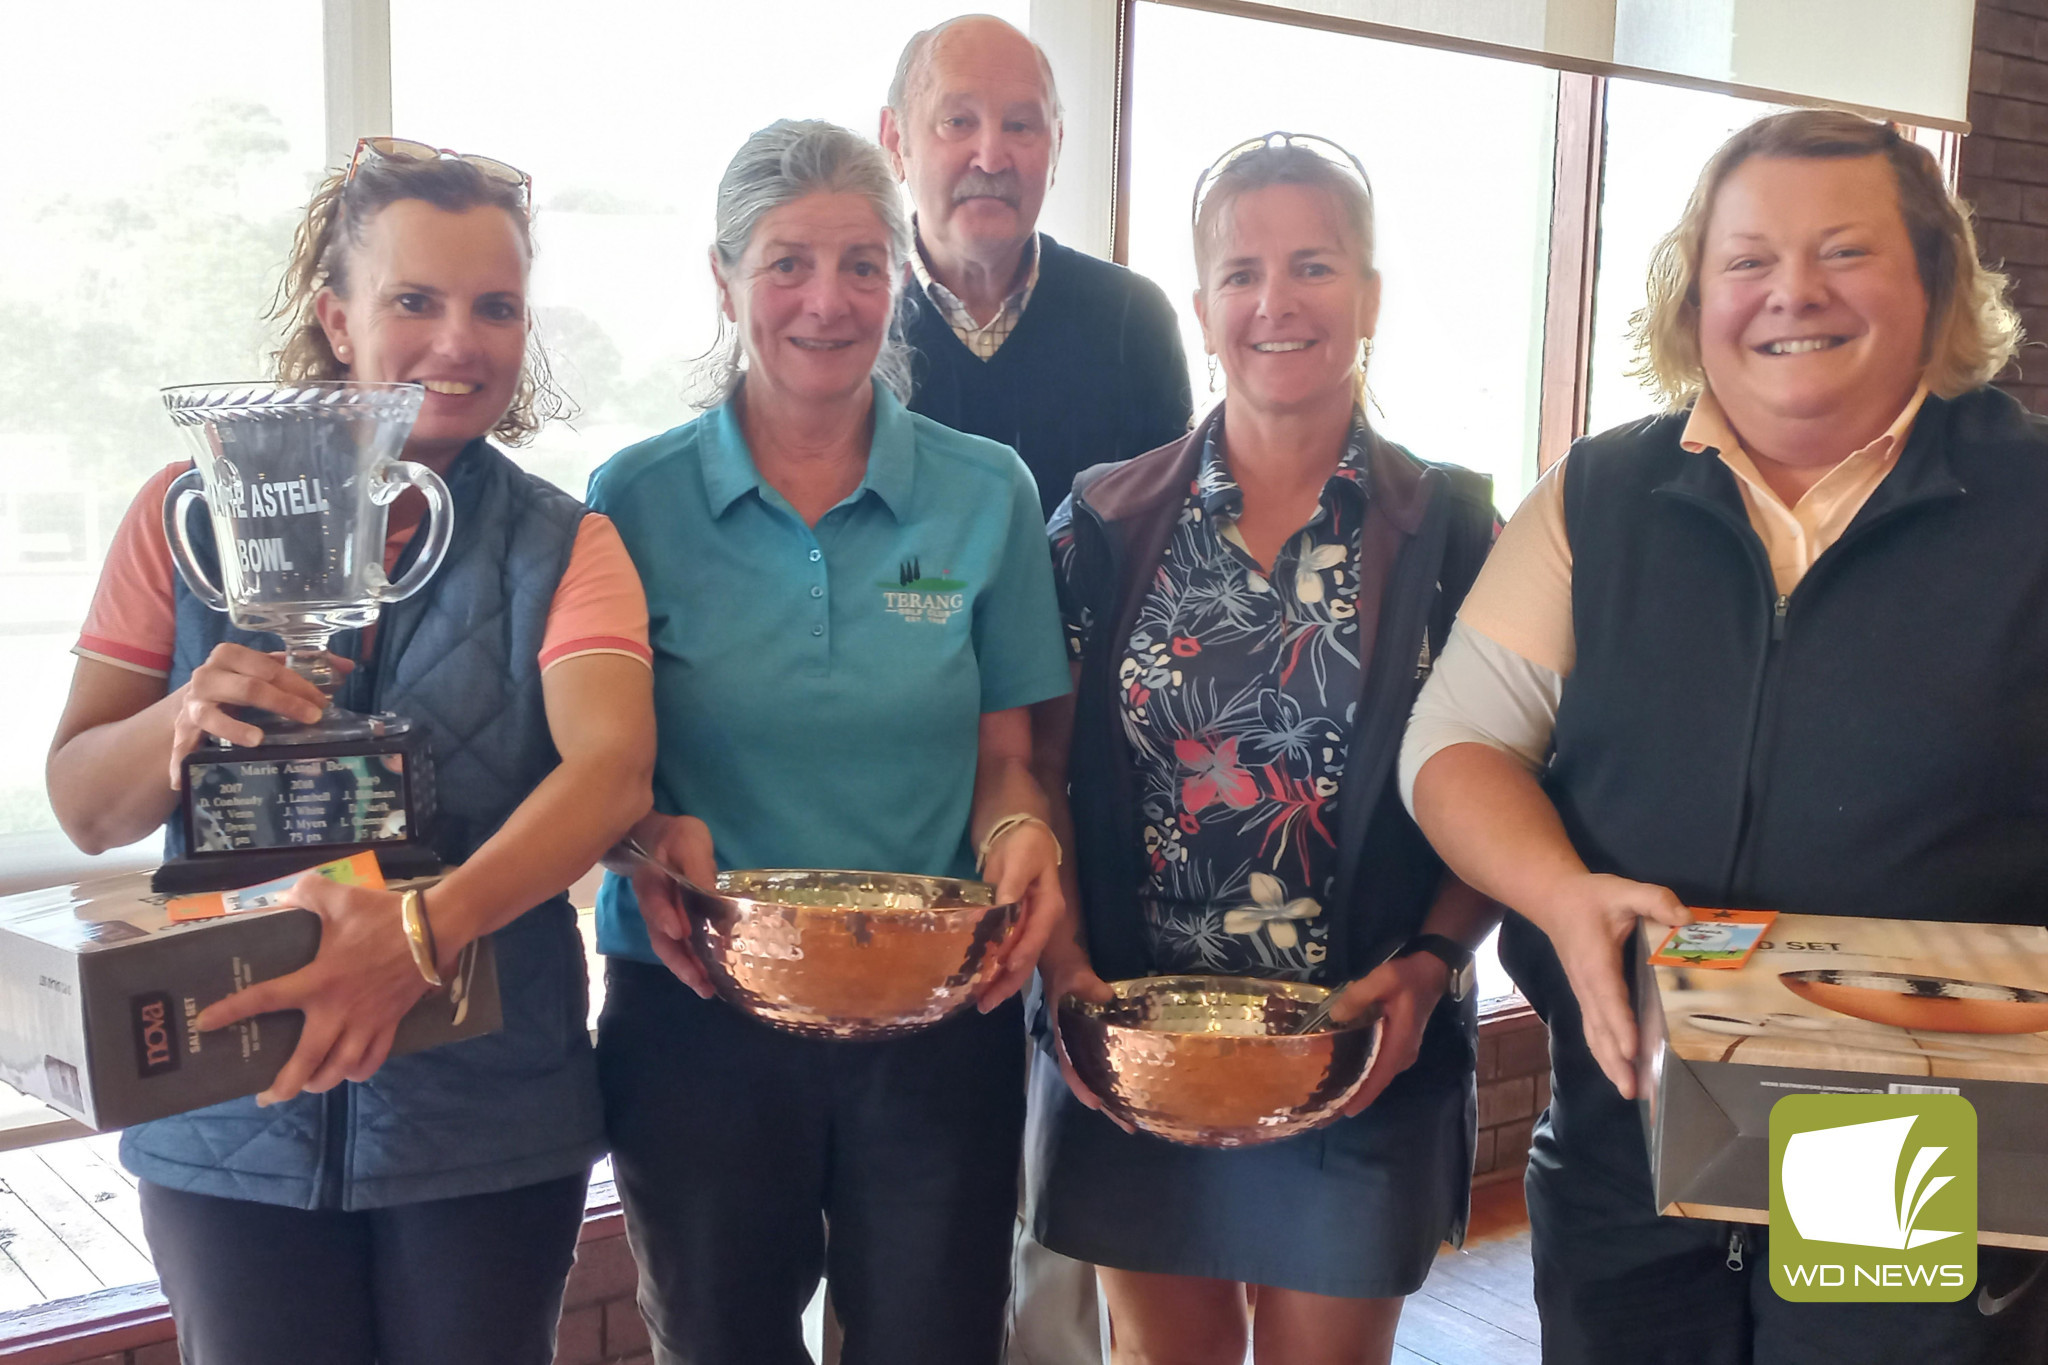 Marie Astell Bowl winners, from left, Sheree Scanlon, Jo Arundell, Tracey Baker and Maddy Dalton with Charles Astell.